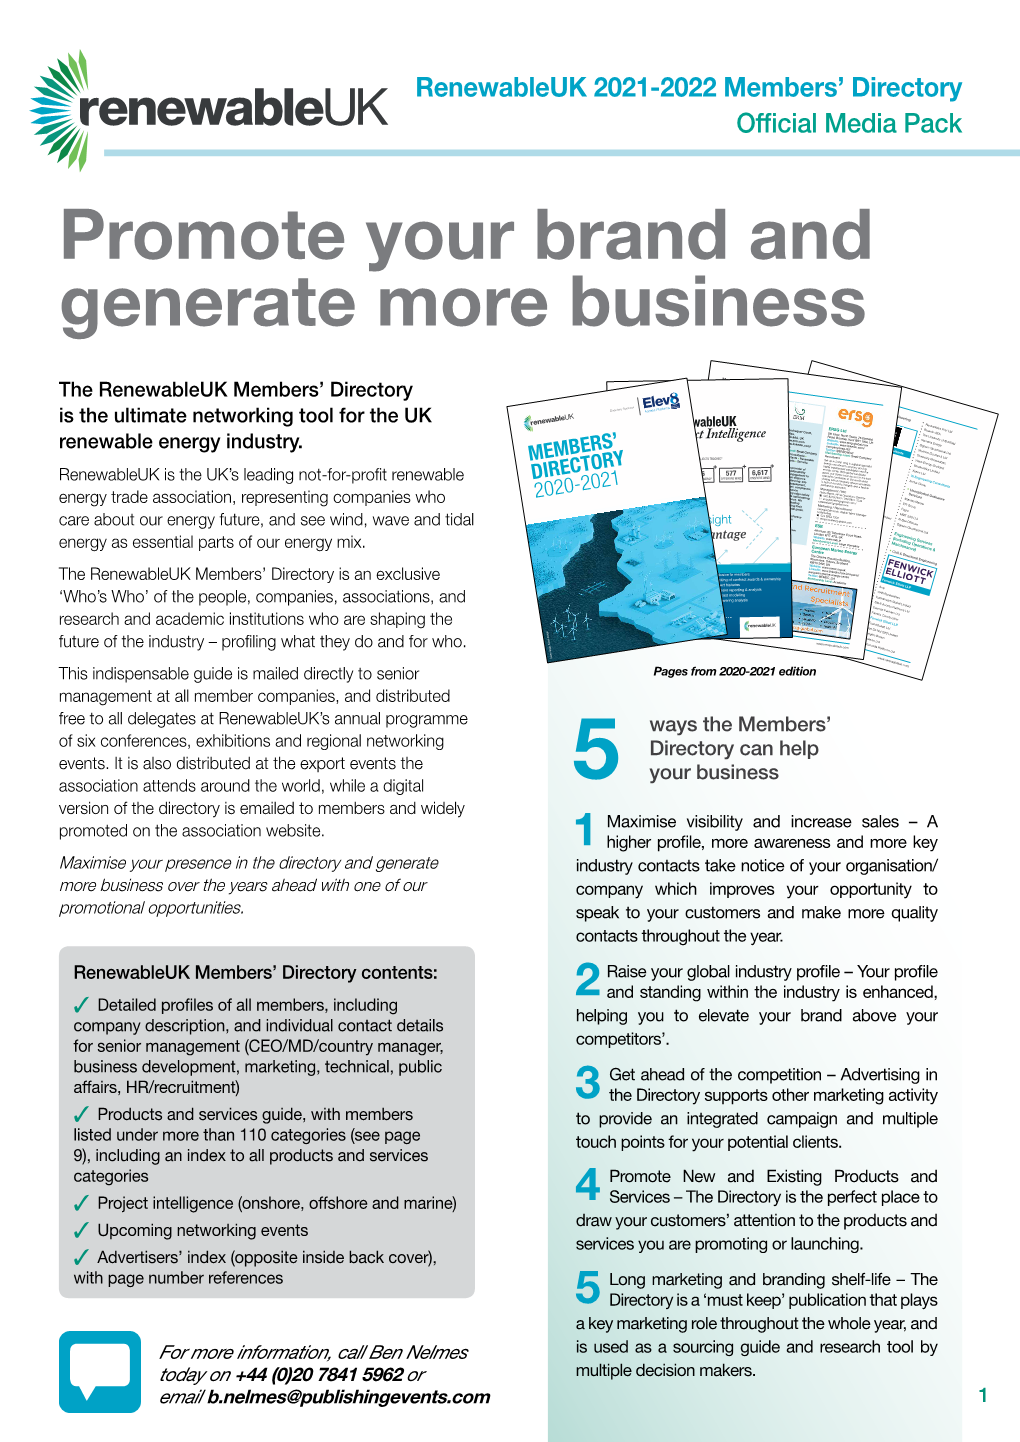 Promote Your Brand and Generate More Business